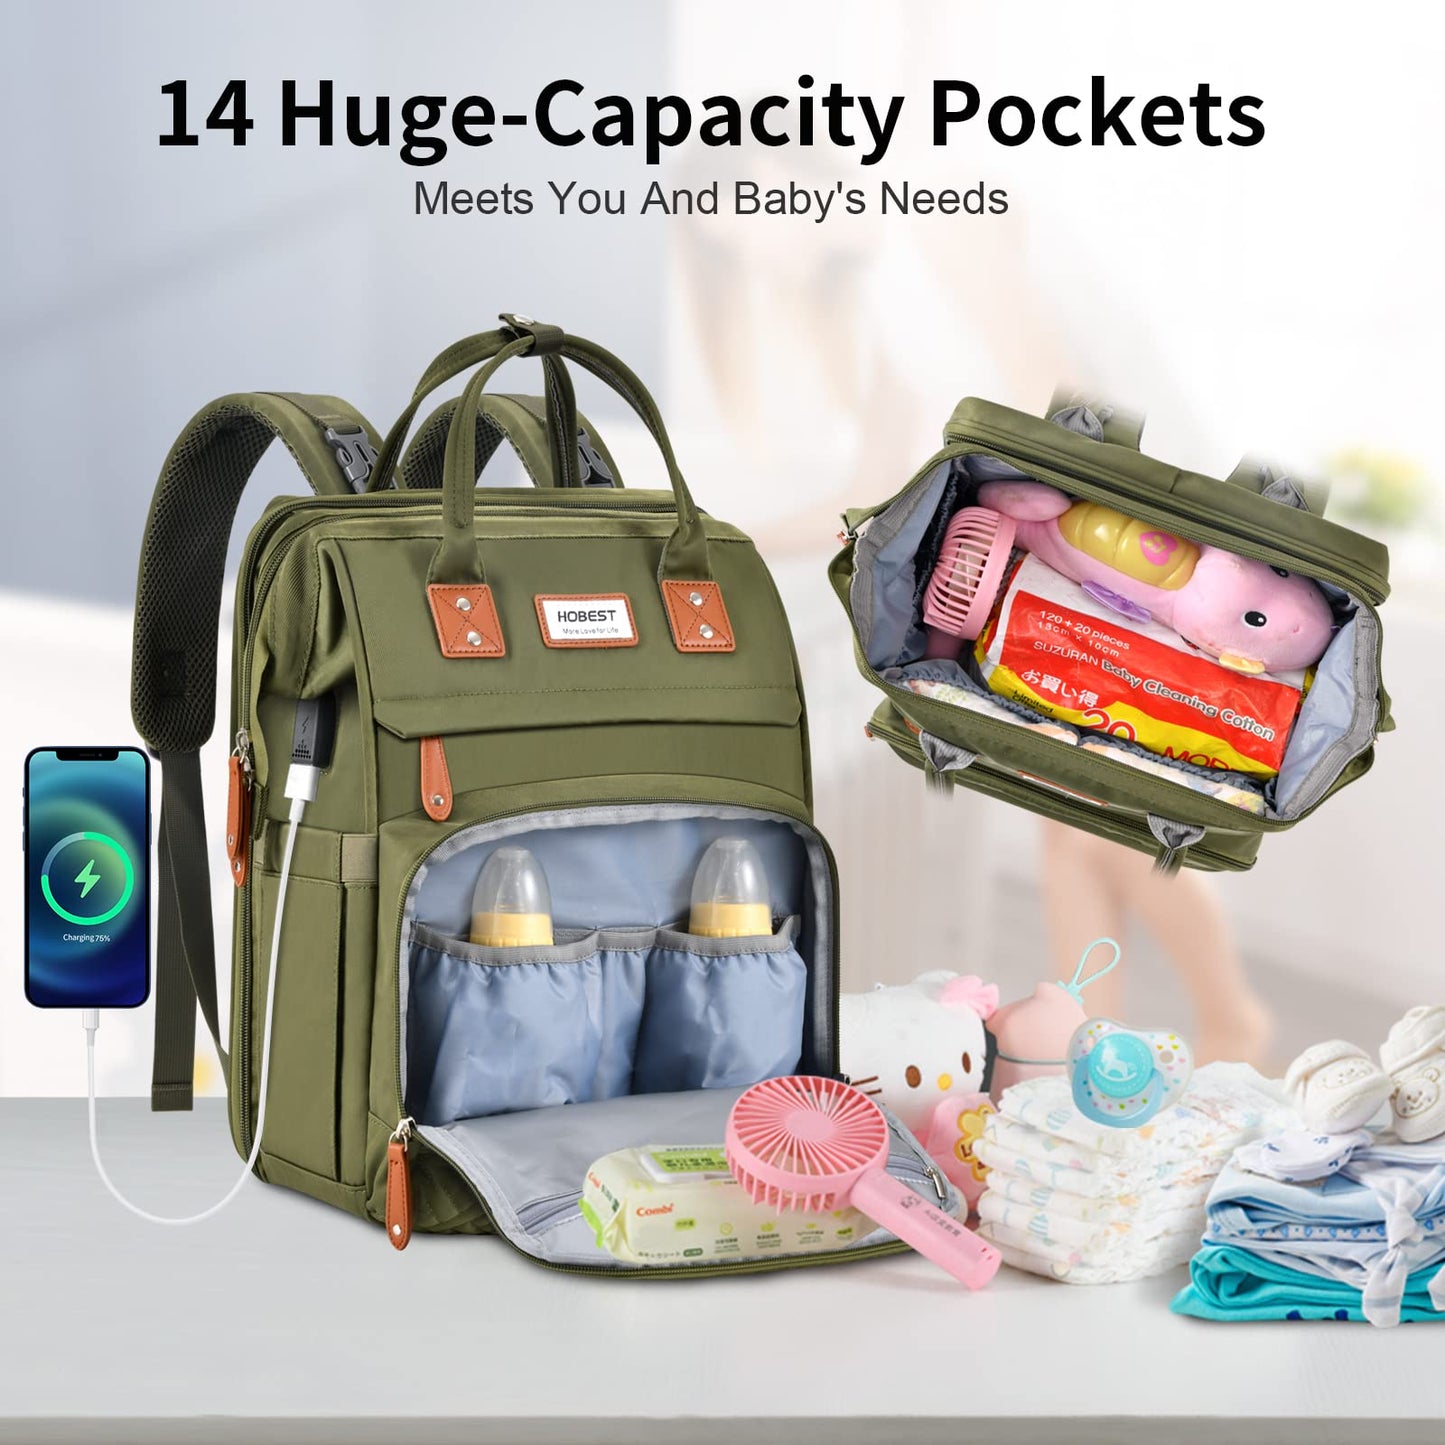 HOBEST Diaper Bag Backpack, Multifunction Large Travel Diaper Bag with Changing Pad and USB Charging Port for Moms Dads